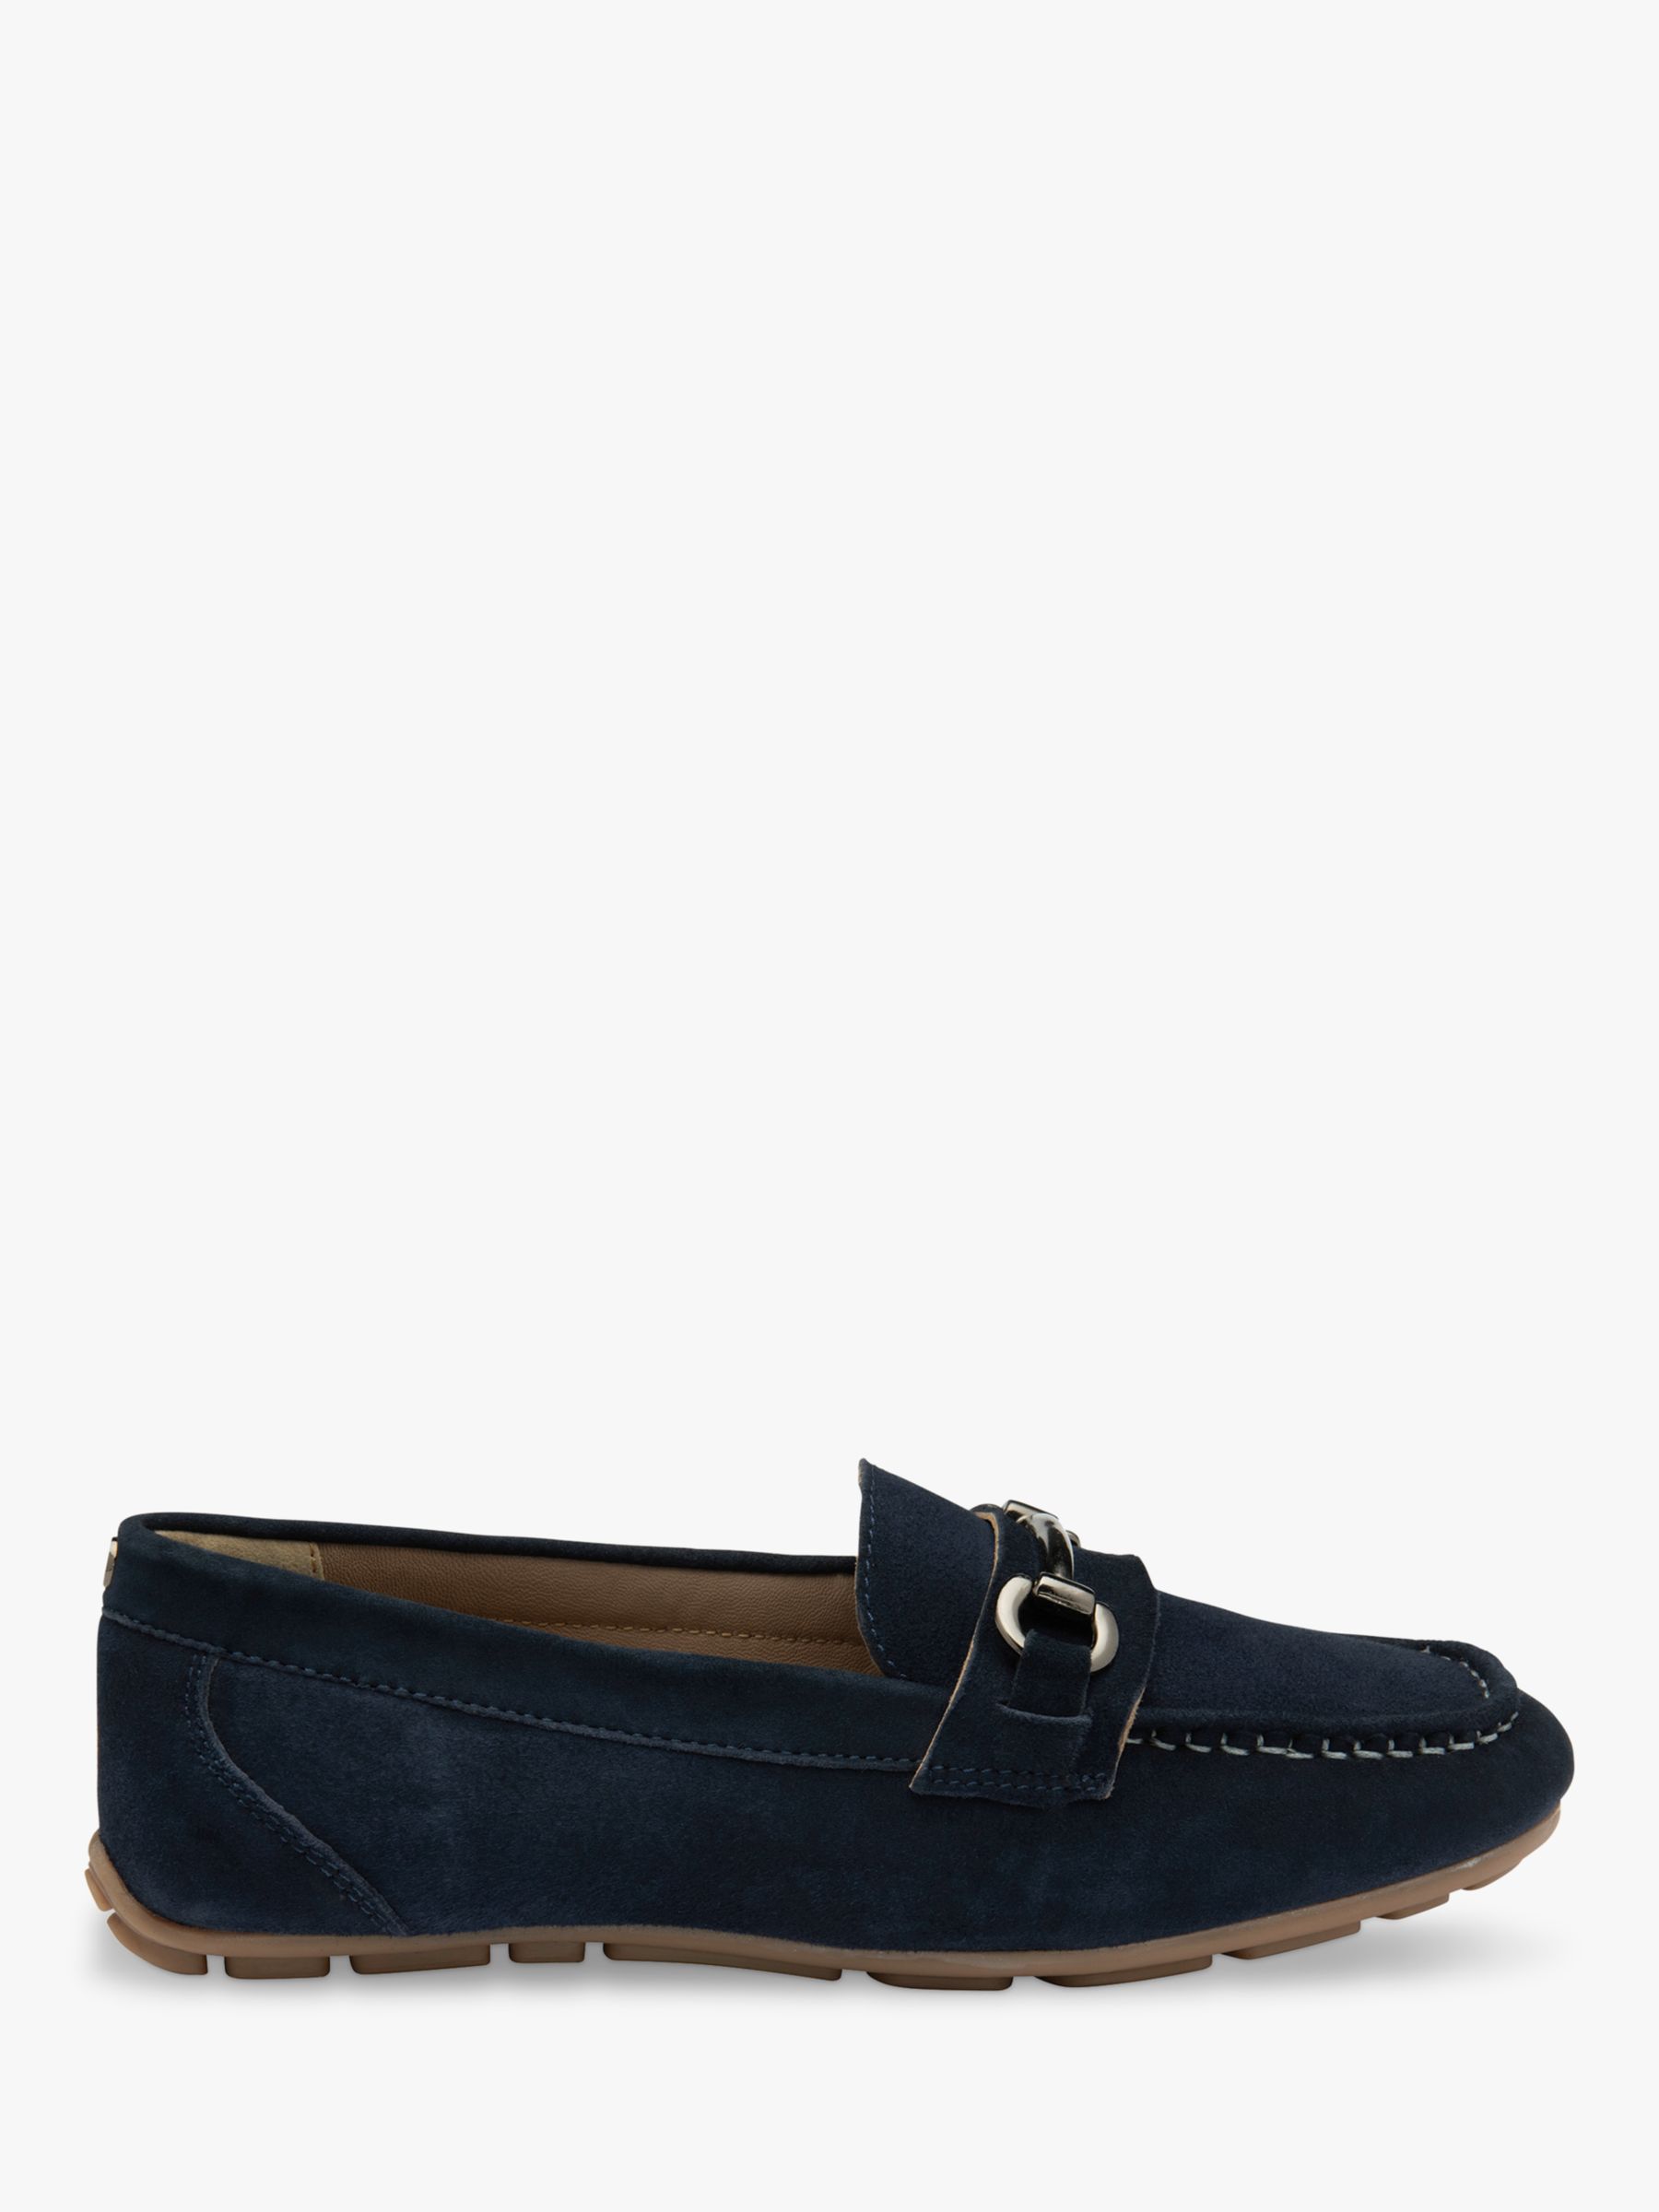 Ravel Dutton Suede Loafers, Navy, 6